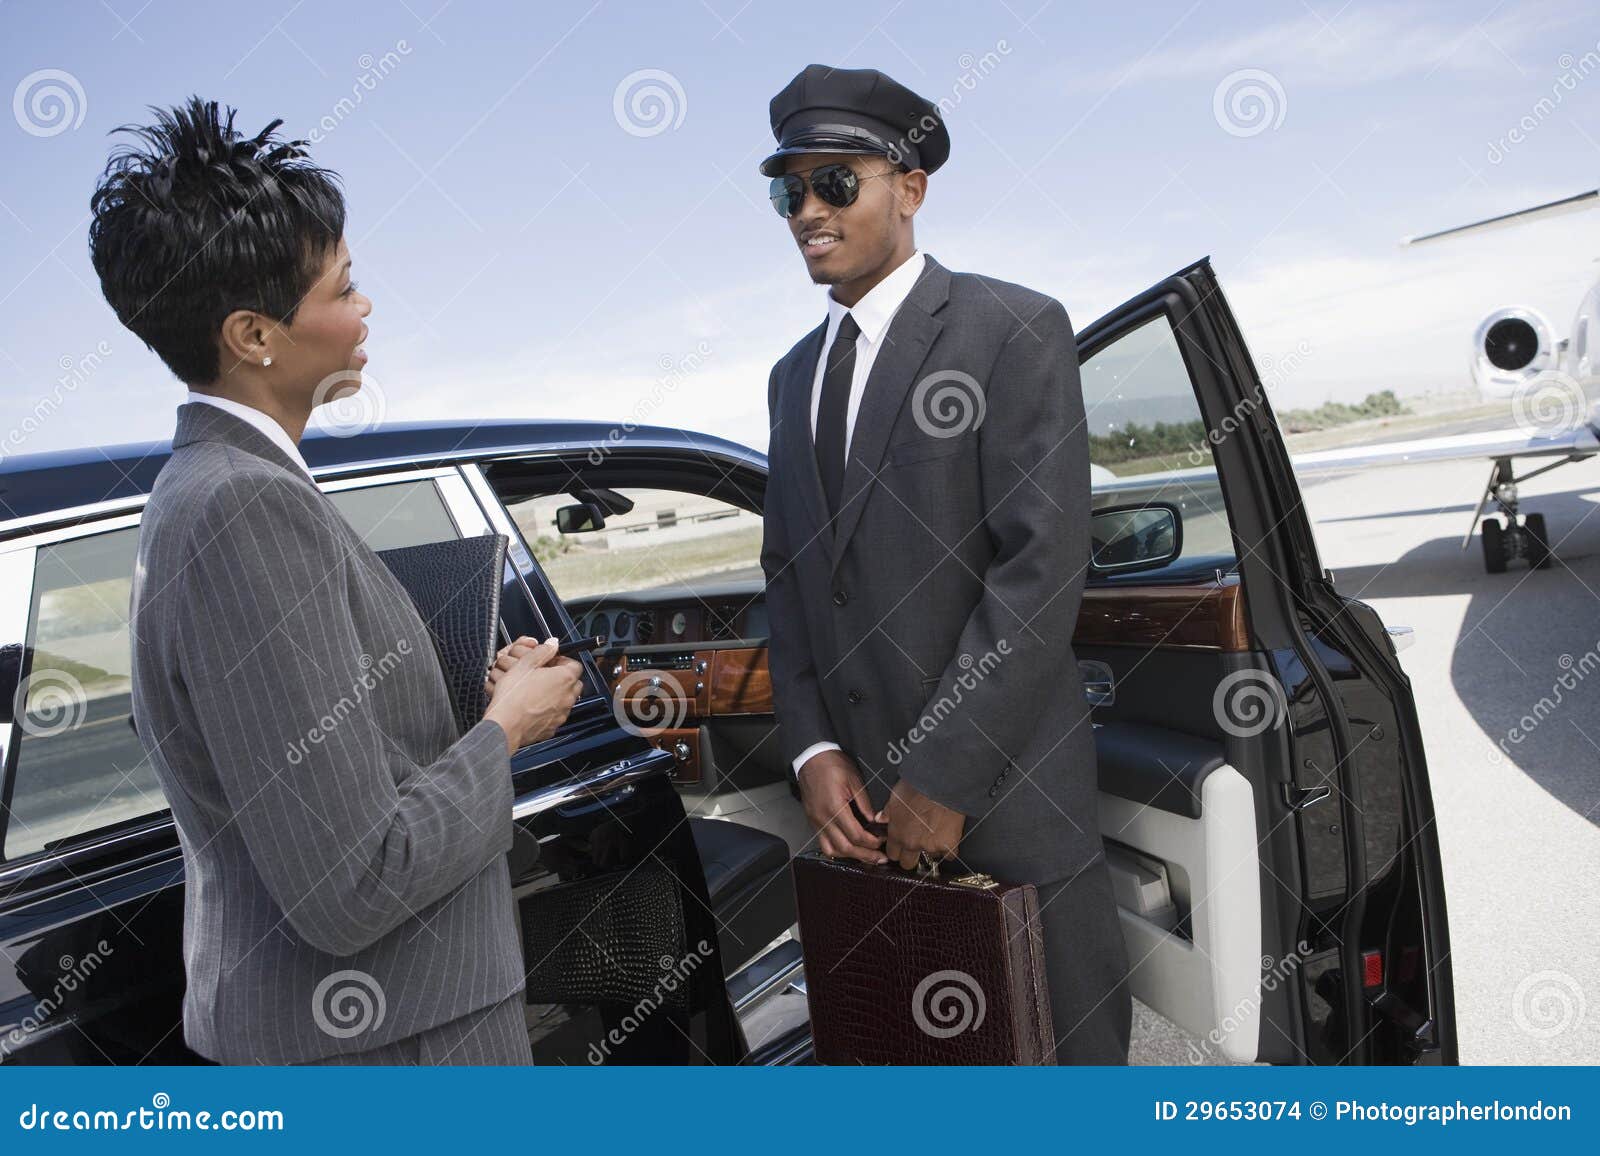 businesswoman communicating with driver on airfield